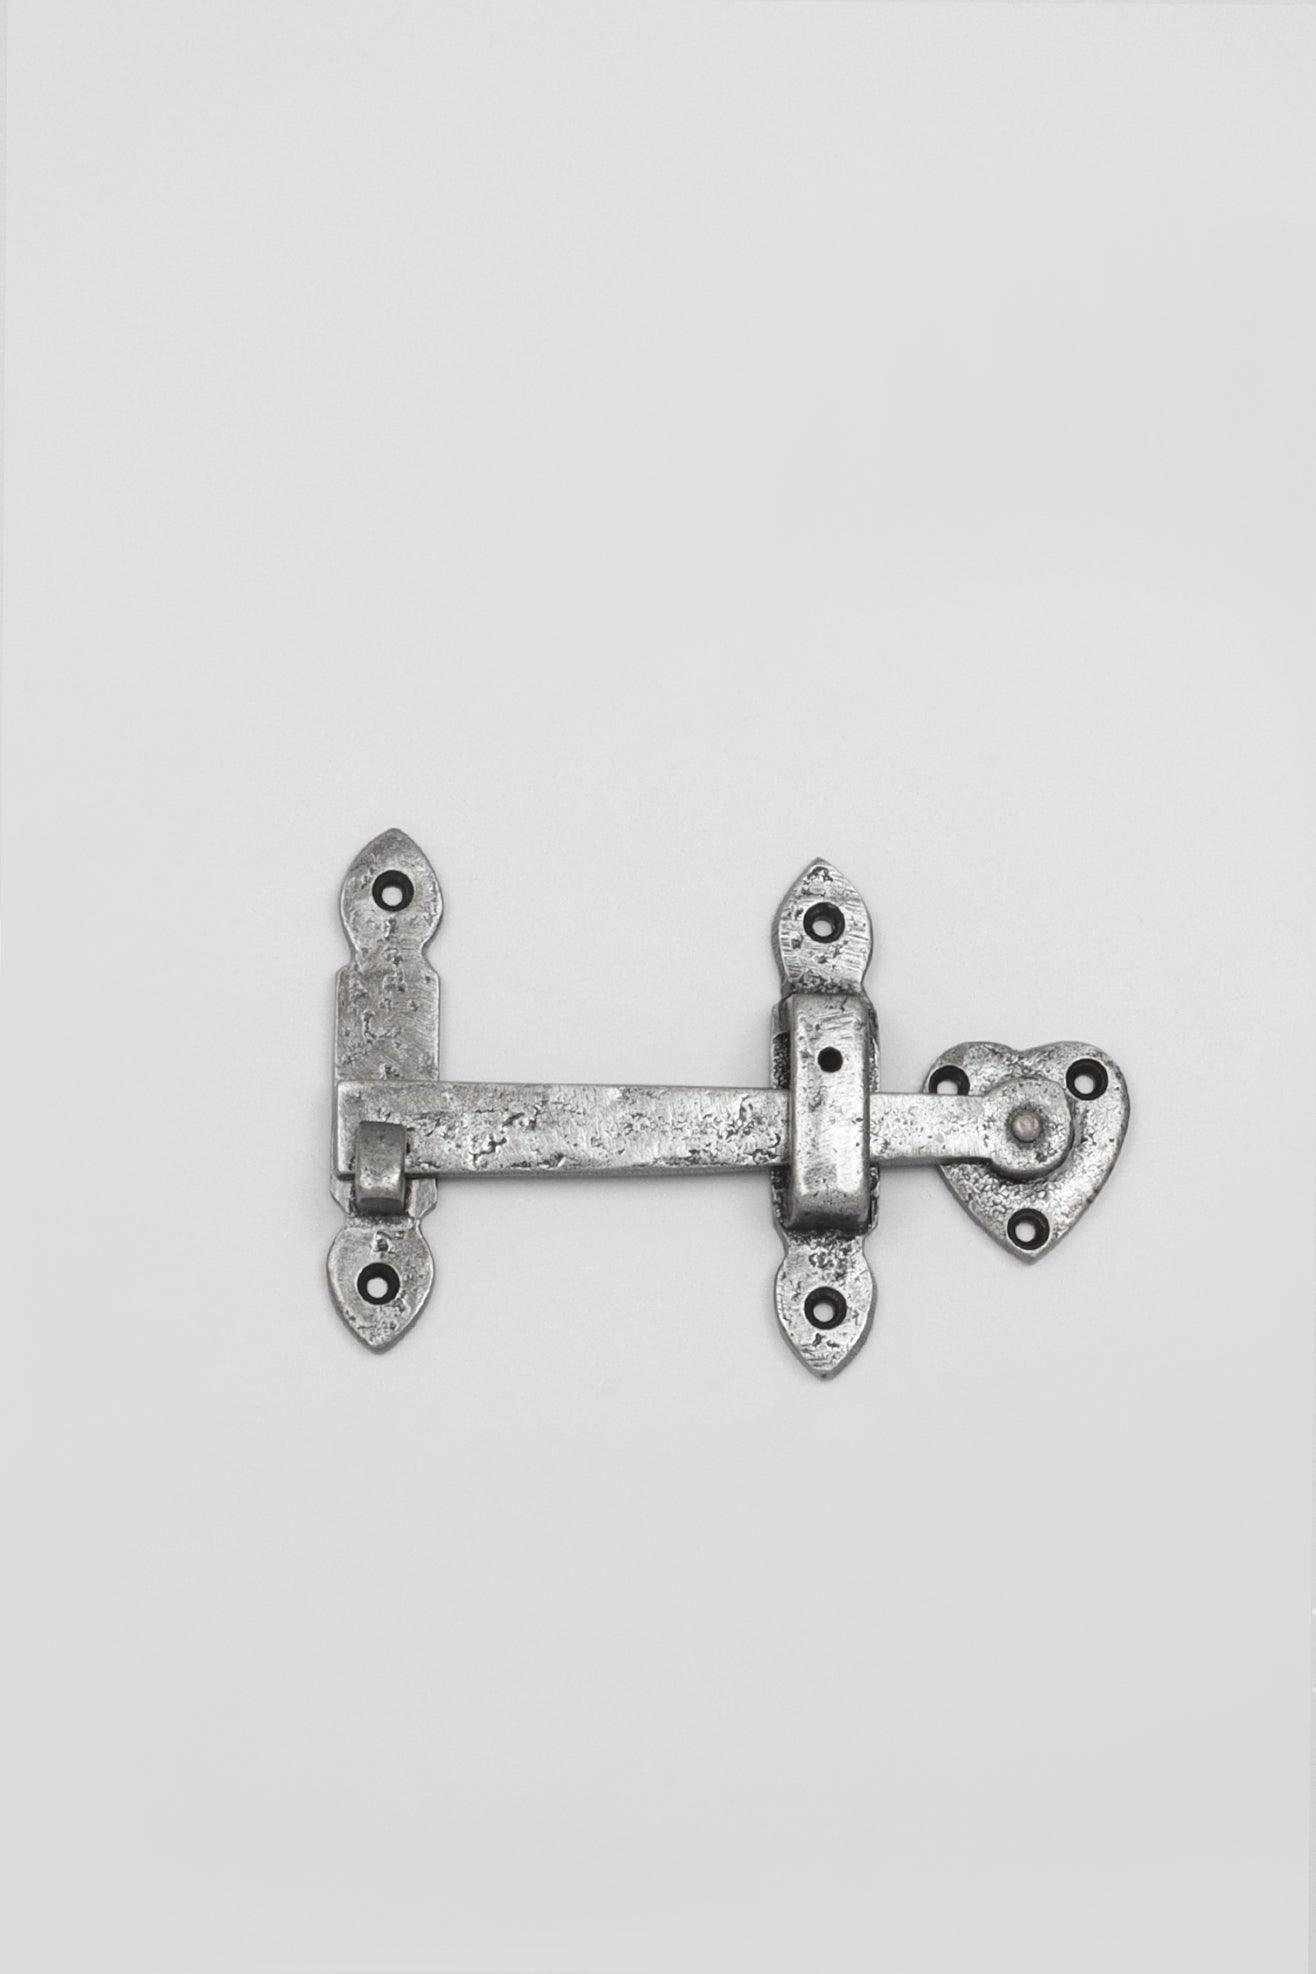 G Decor Hinges Set Antique Pewter Gothic Heavy Thumb Latch Door Pack